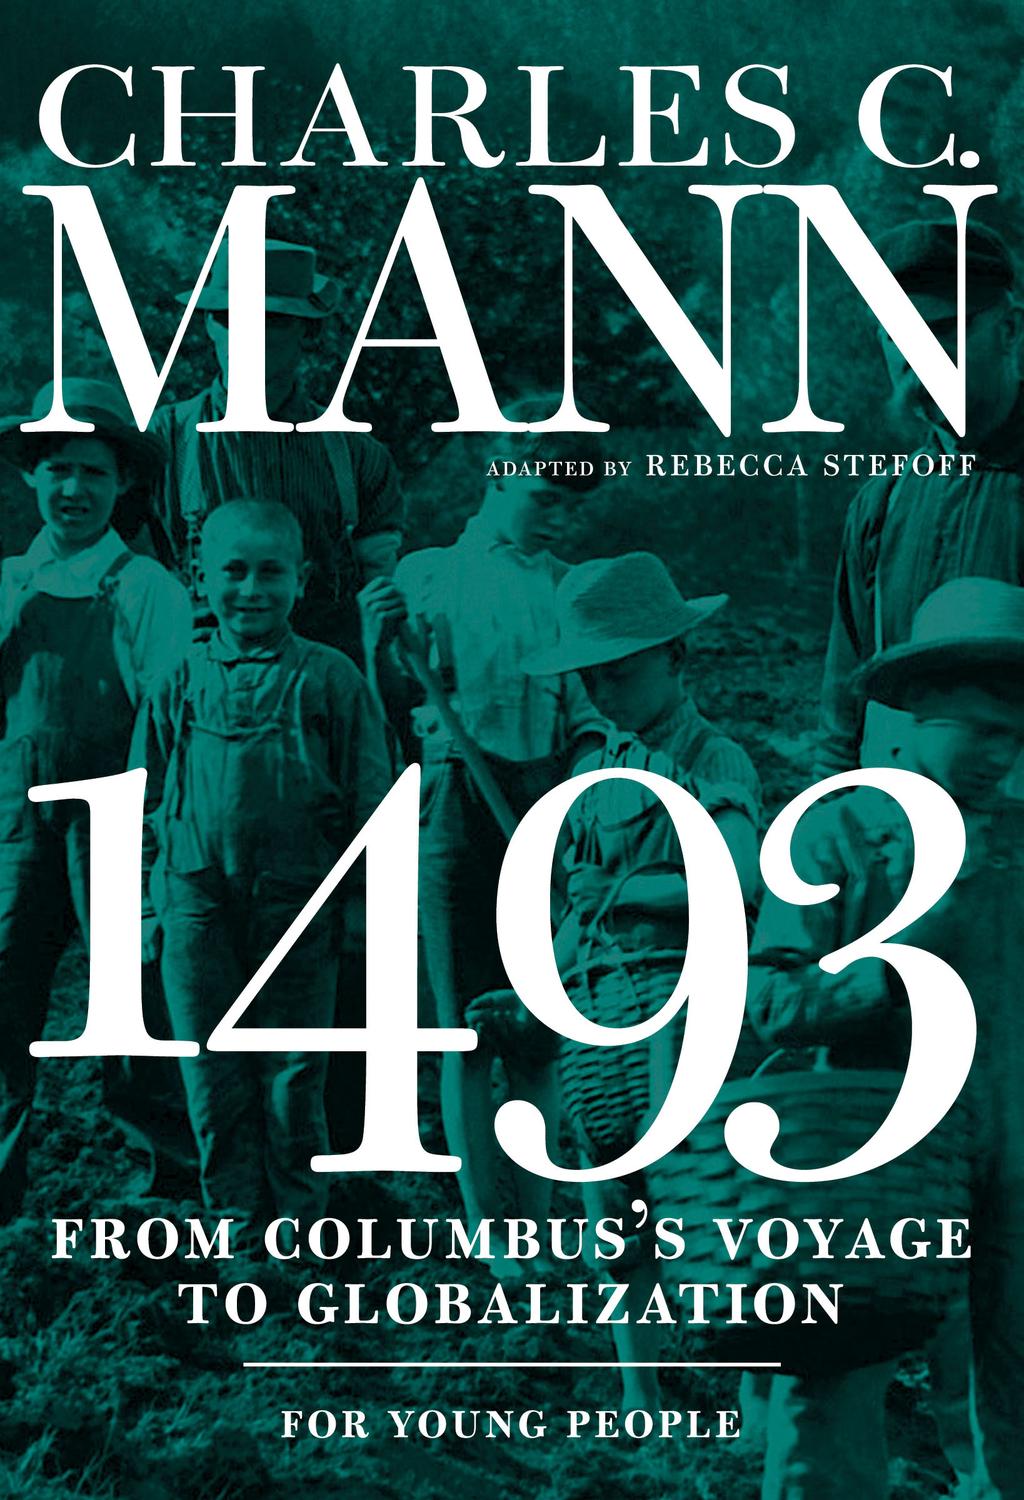 Study Guide 1493 from columbus s voyage to globalization charles c. mann The general age range for this book is 11 18 or 6th grade 12th grade.